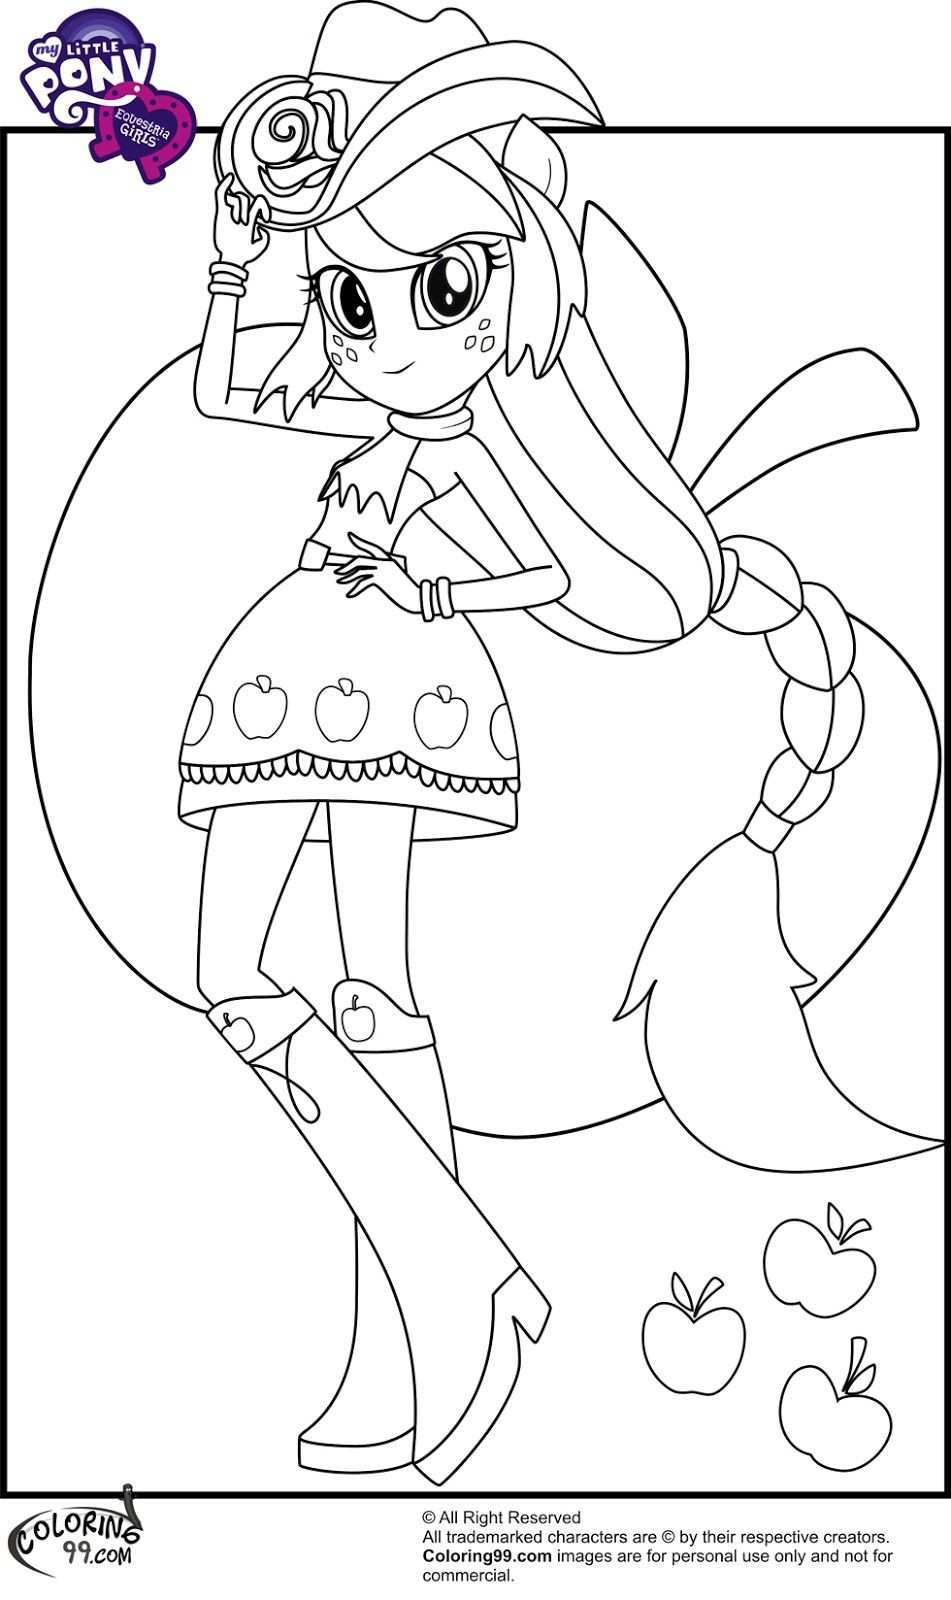 Mlp Applejack Equestria Girls Coloring Pages Jpg 951 1600 My Little Pony Coloring My